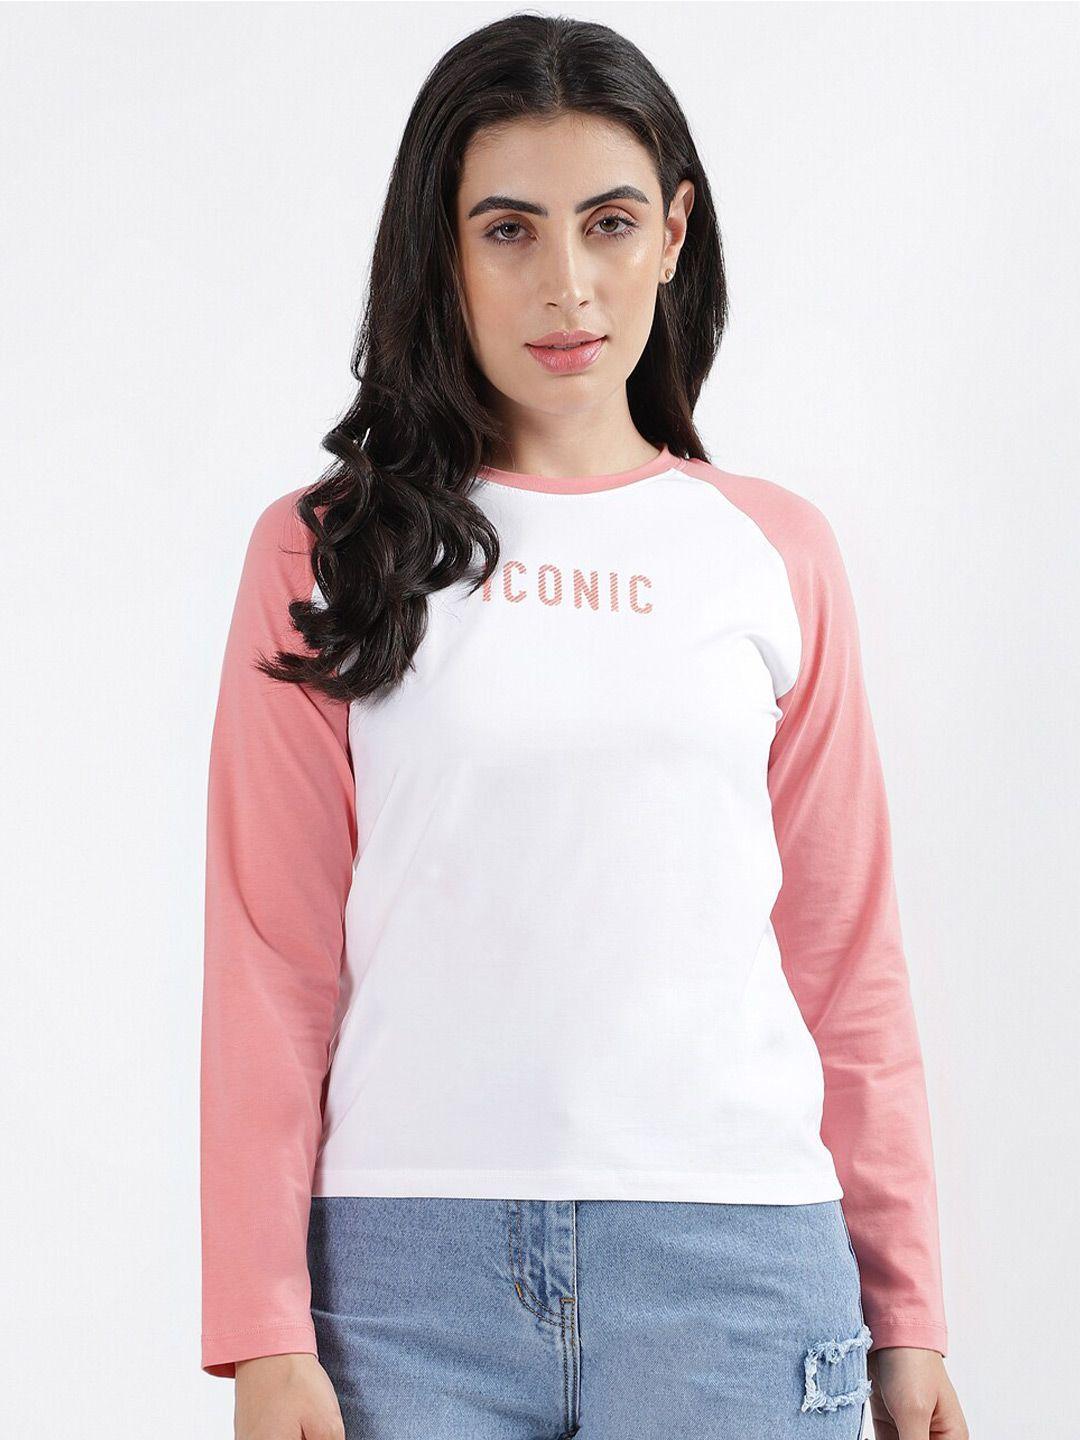 iconic typography printed casual t-shirt